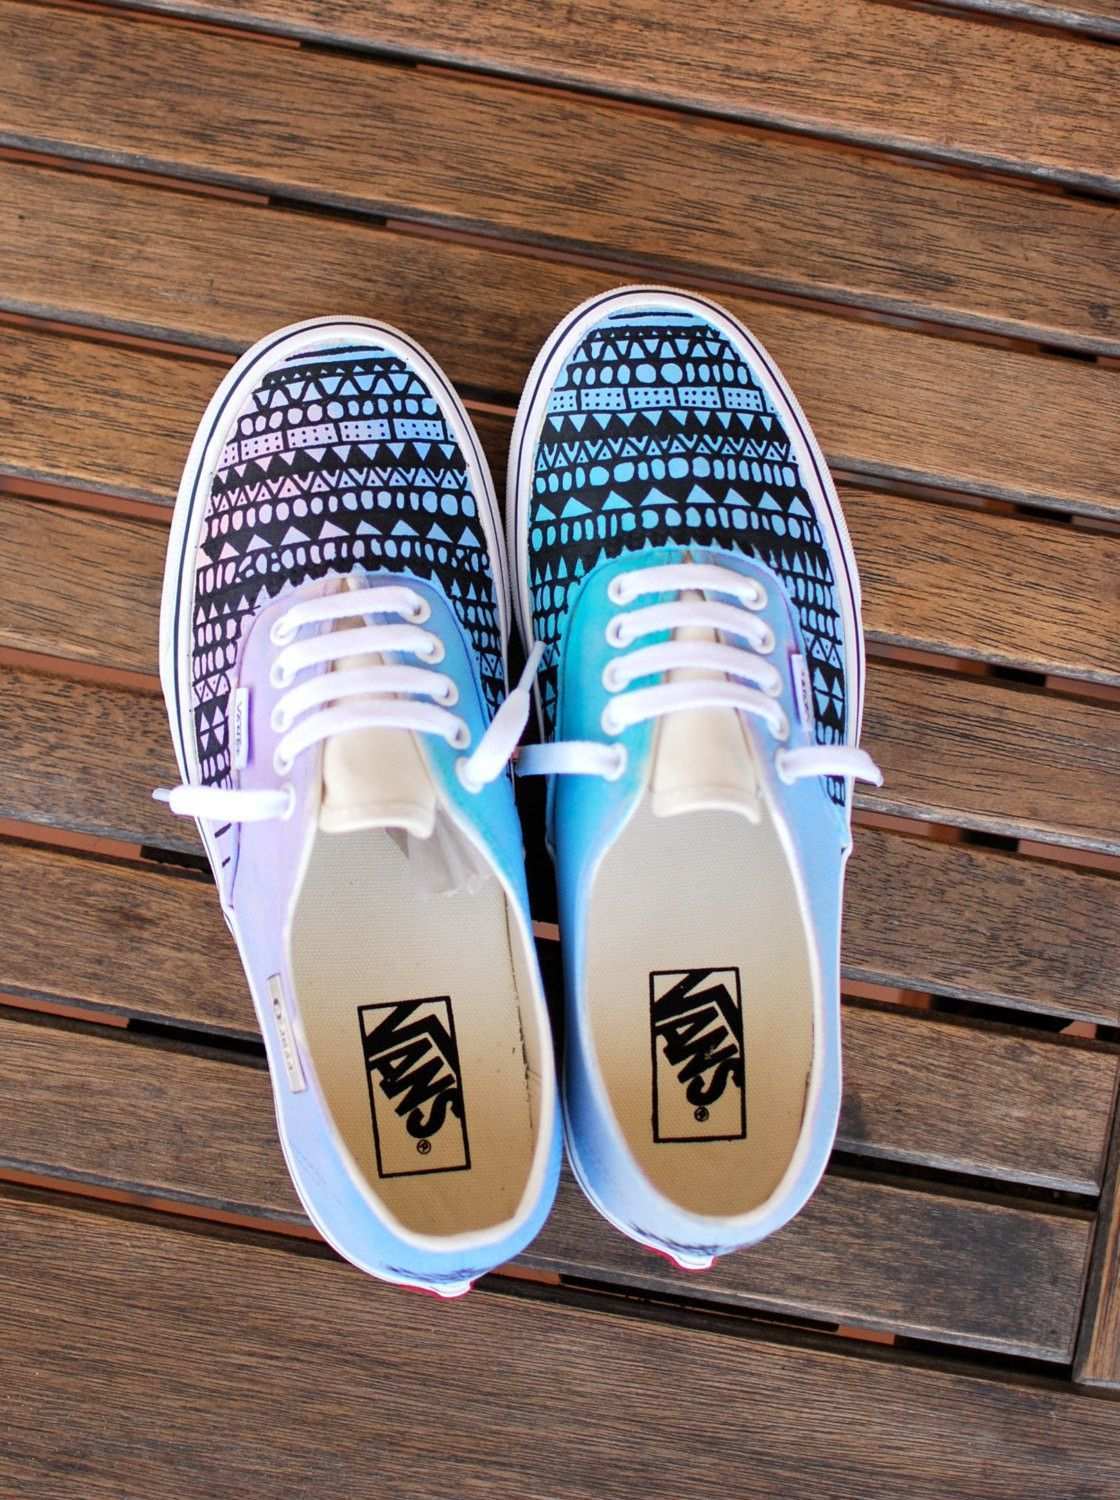 Custom Hand Painted Pastel Tribal Vans Authentic By Bstreetshoes Zapatos Vans Mujer Zapatos Vans Zapatos